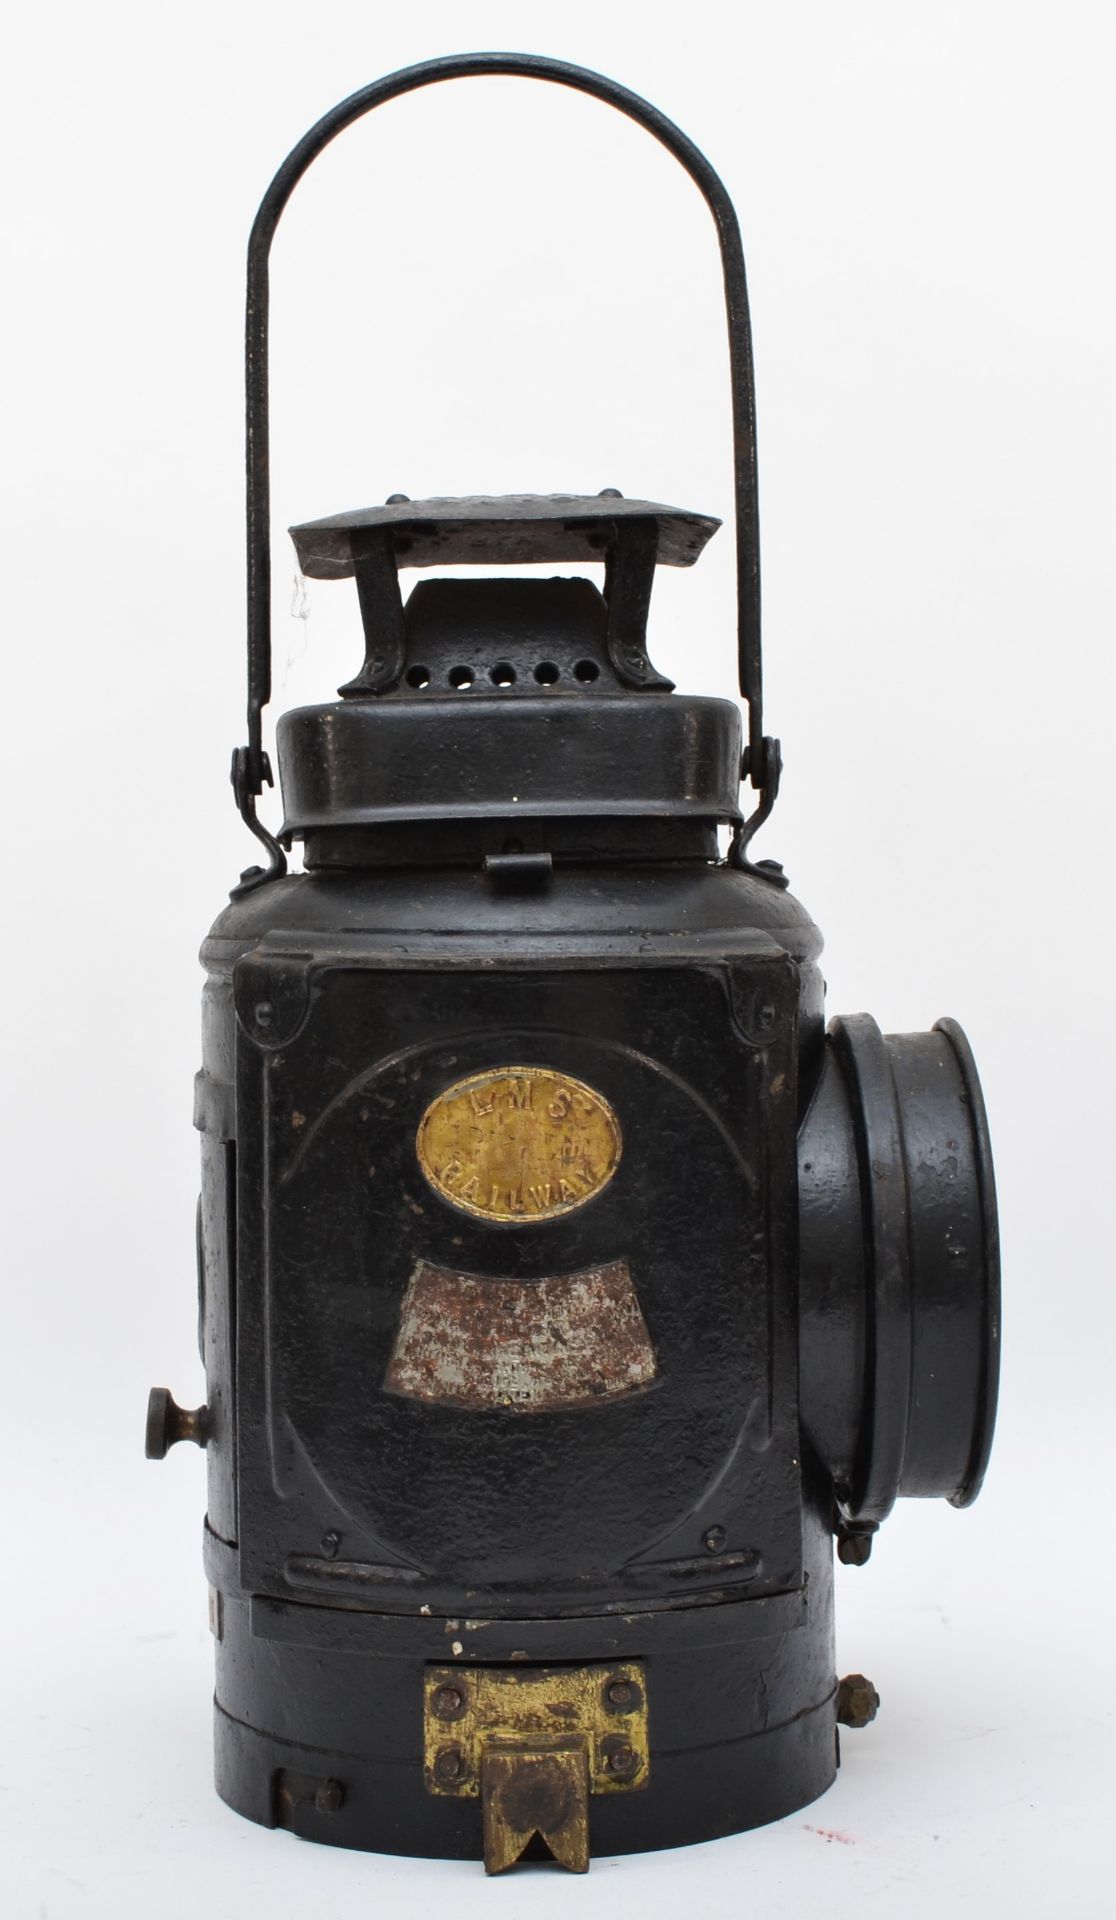 Adlake non-sweating railway lamp, complete with burner, brass pluaqe stamped with L.M.S. Railways - Image 2 of 3